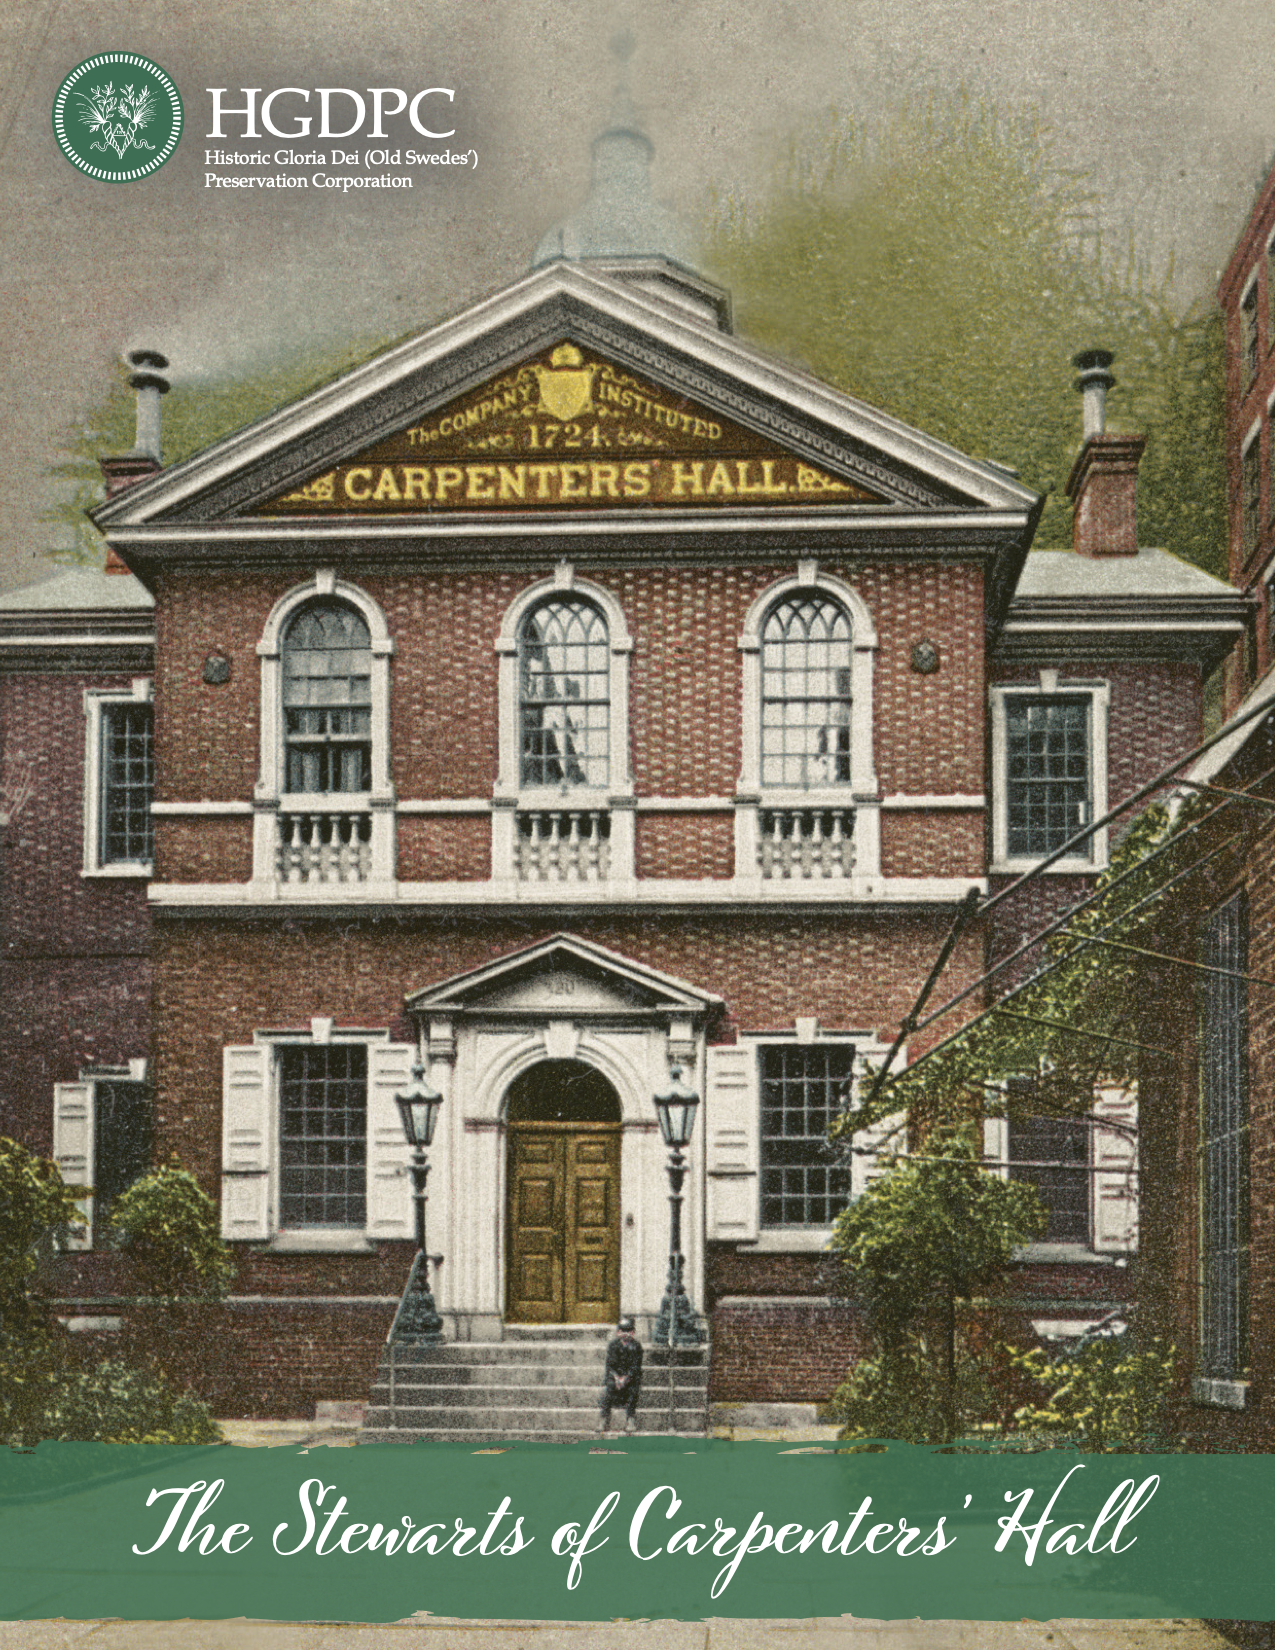 The Stewarts of Carpenters’ Hall [Spring 2021]